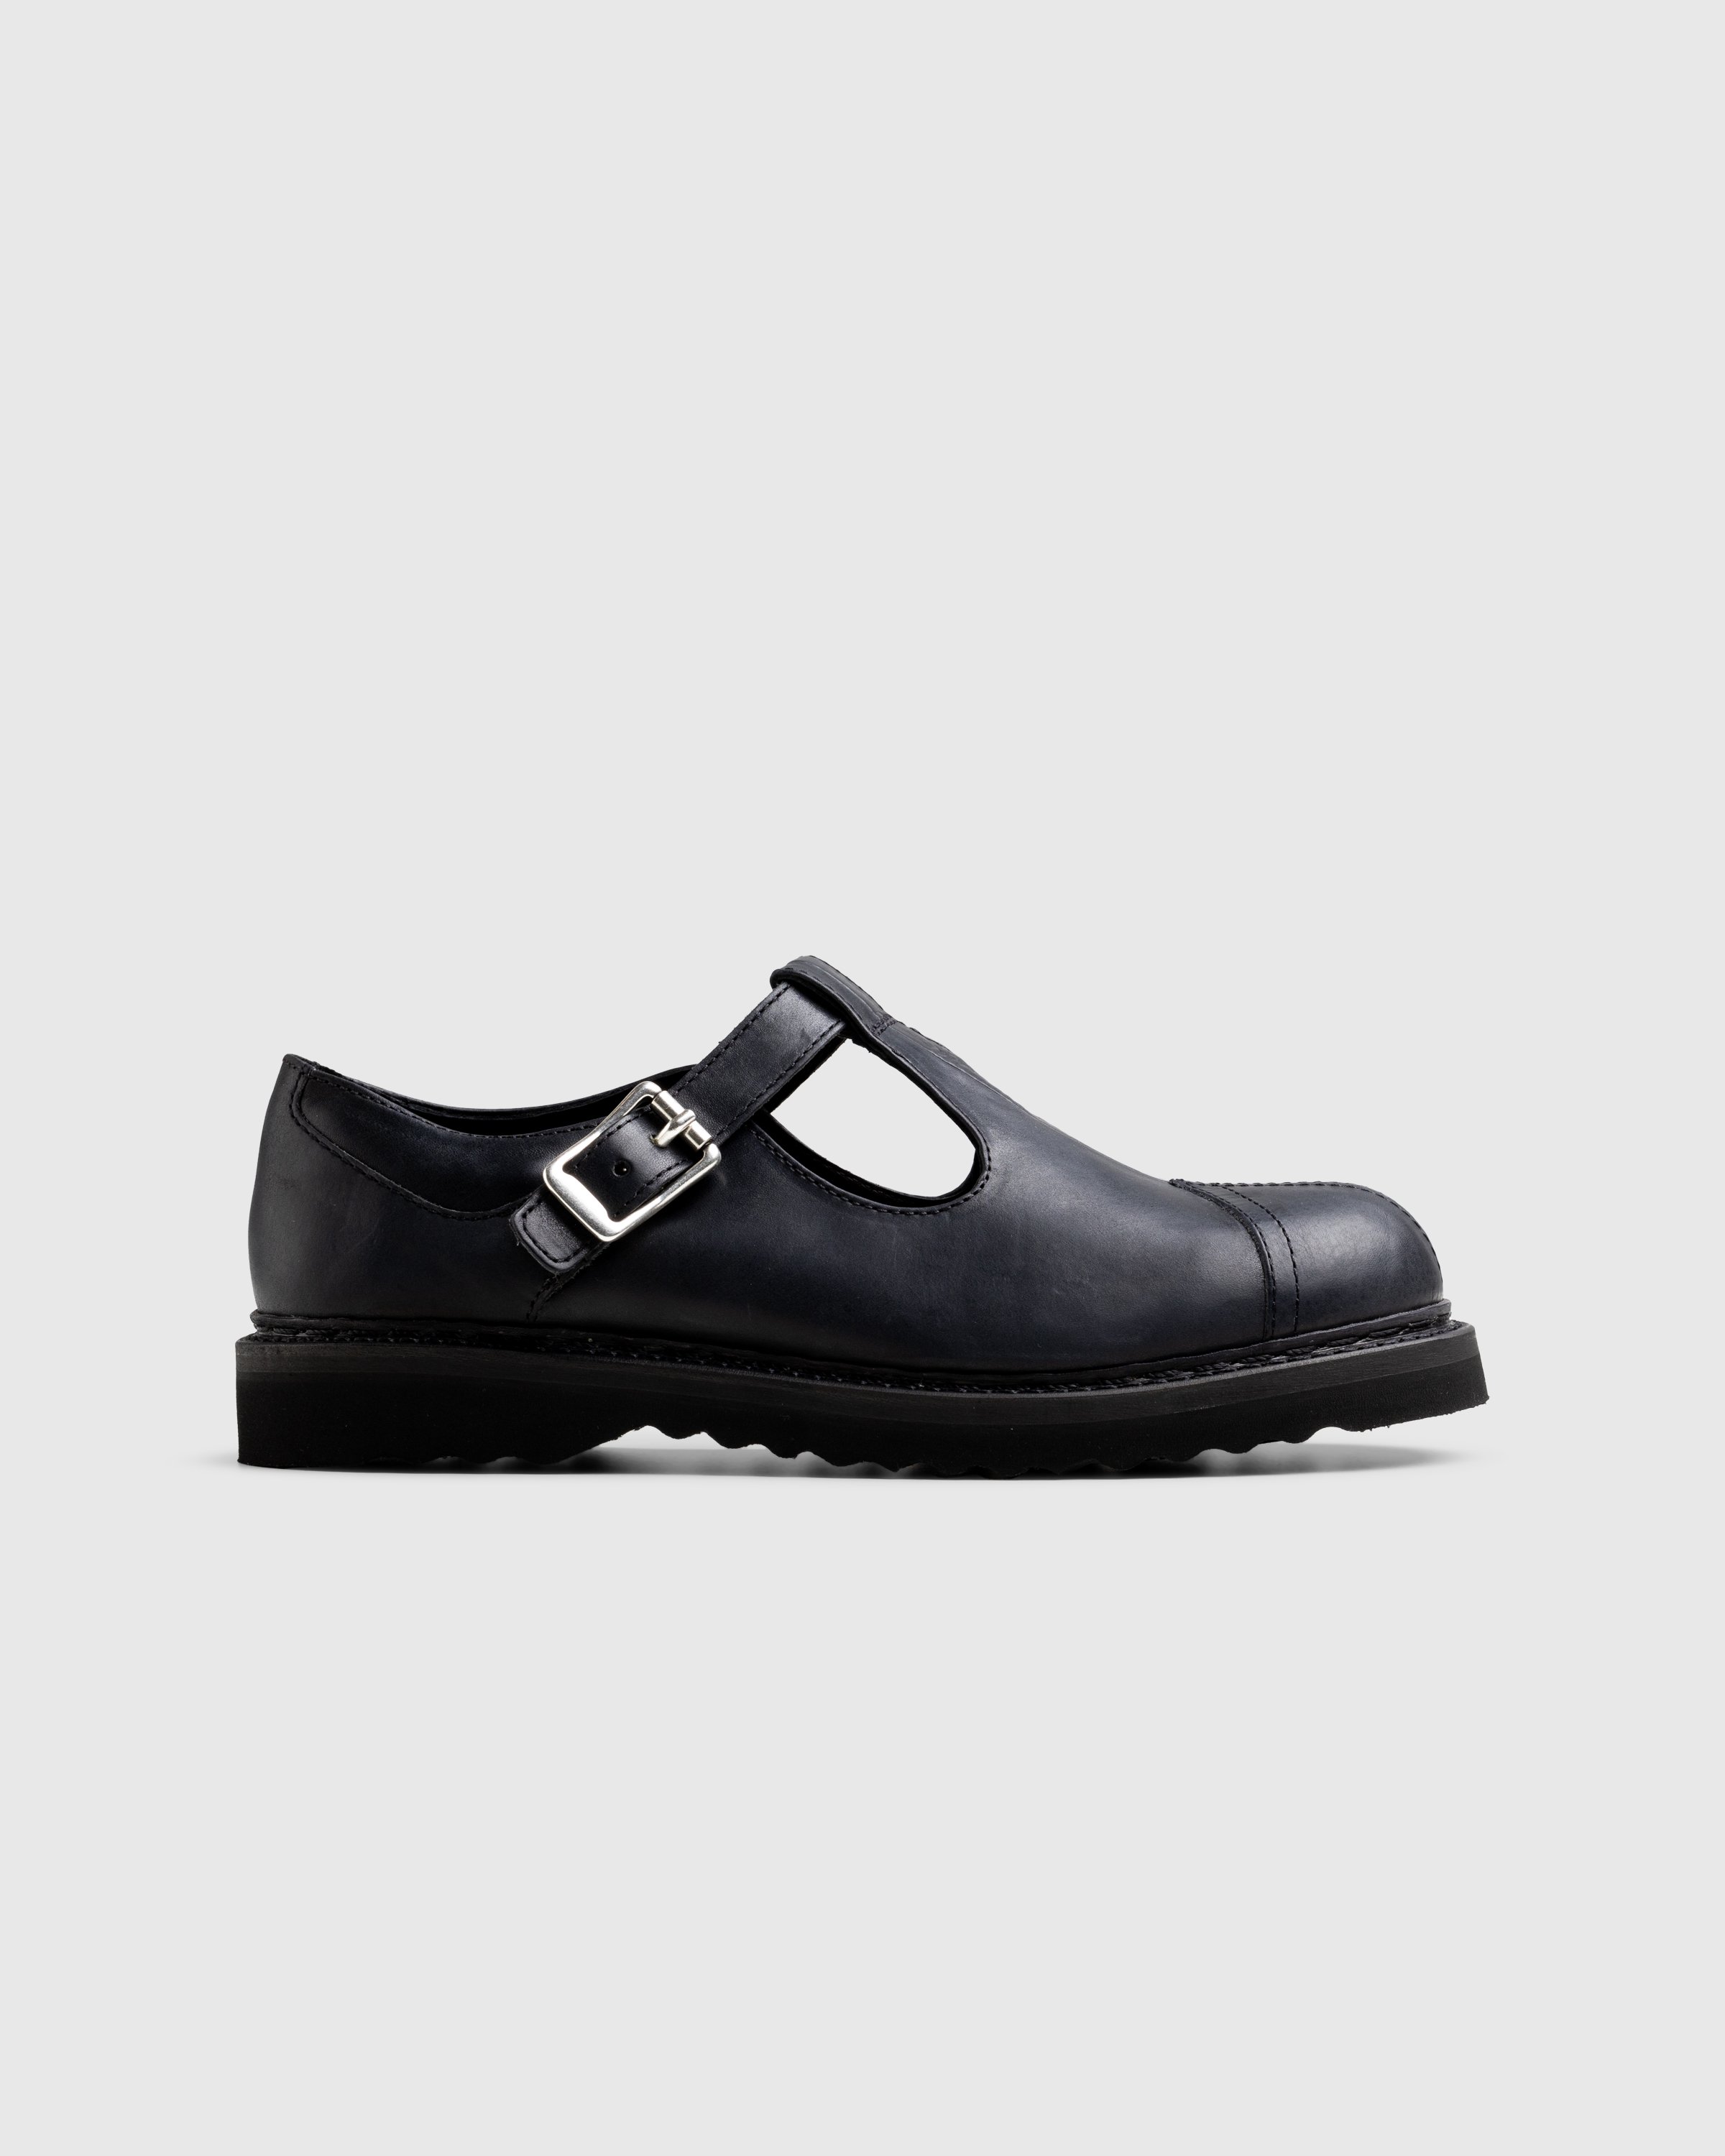 Our Legacy - Camden Shoe Car Tire Black Leather - Footwear - Black - Image 1